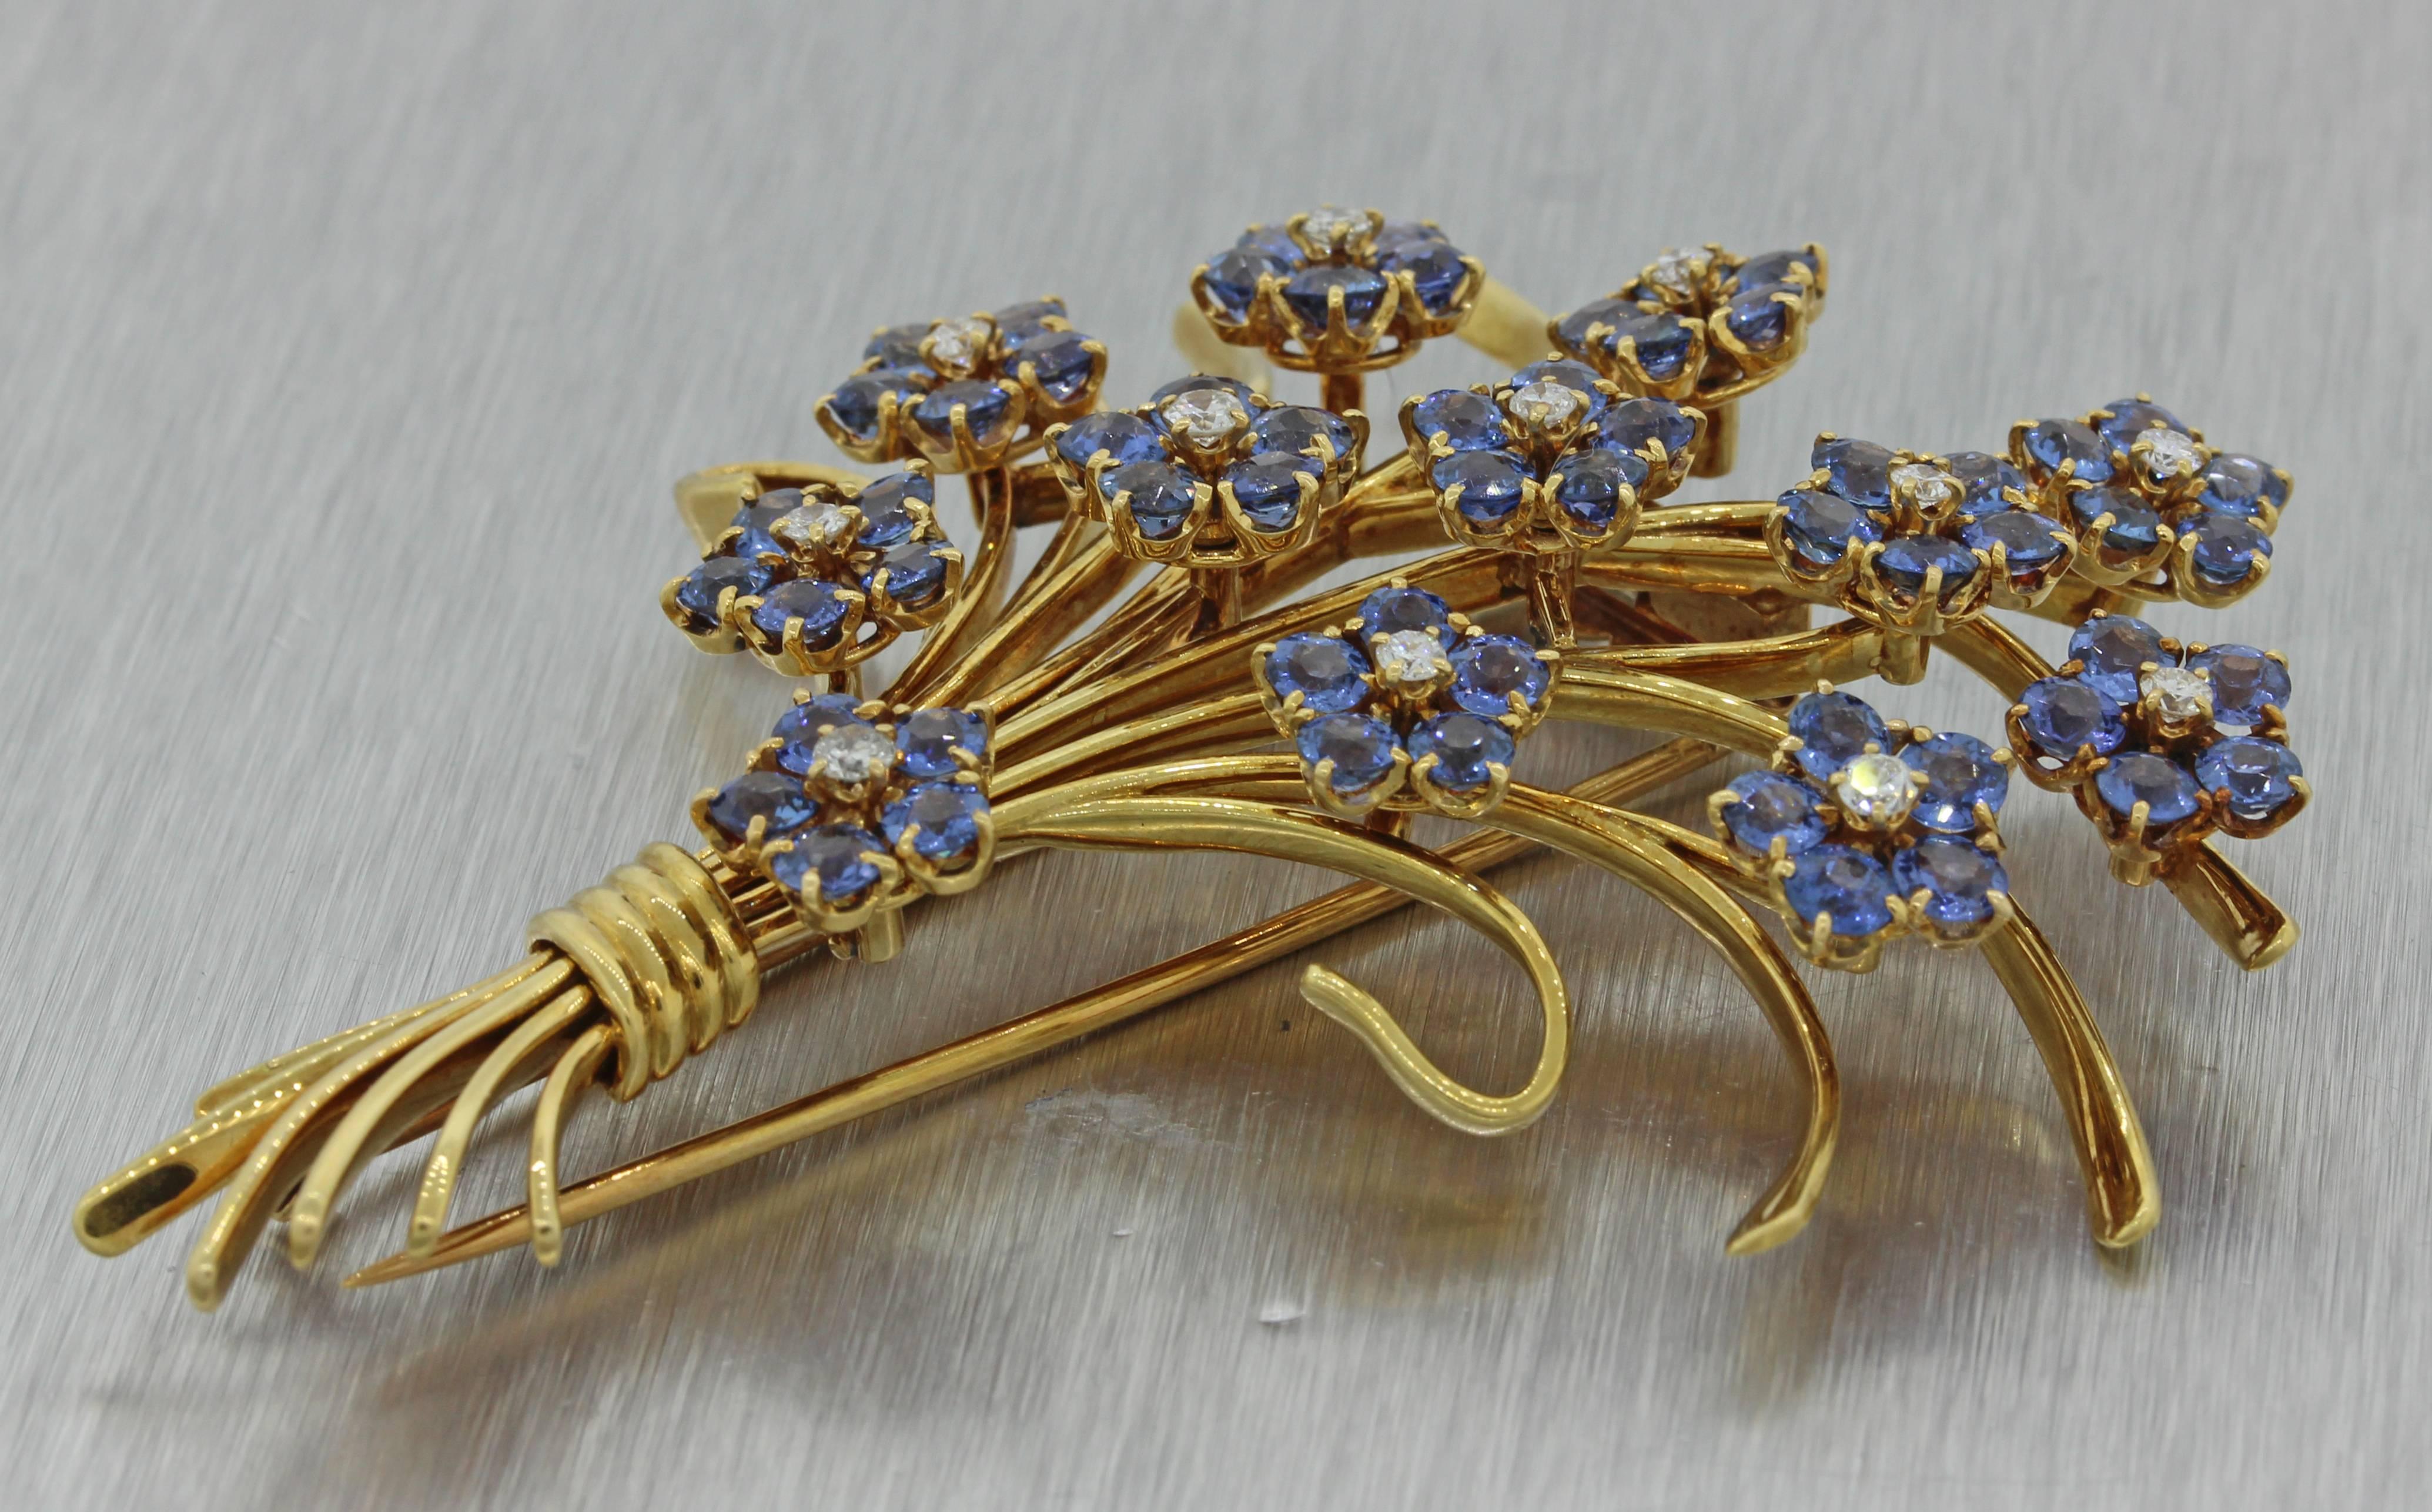 This is a a beautiful Vintage Estate Van Cleef & Arpels 18k Yellow Gold Diamond Sapphire Flower Bouquet Brooch Pin. It will come professionally packaged in a beautiful gift presentation box and our 30day money-back guarantee.

Dimensions 	3.00